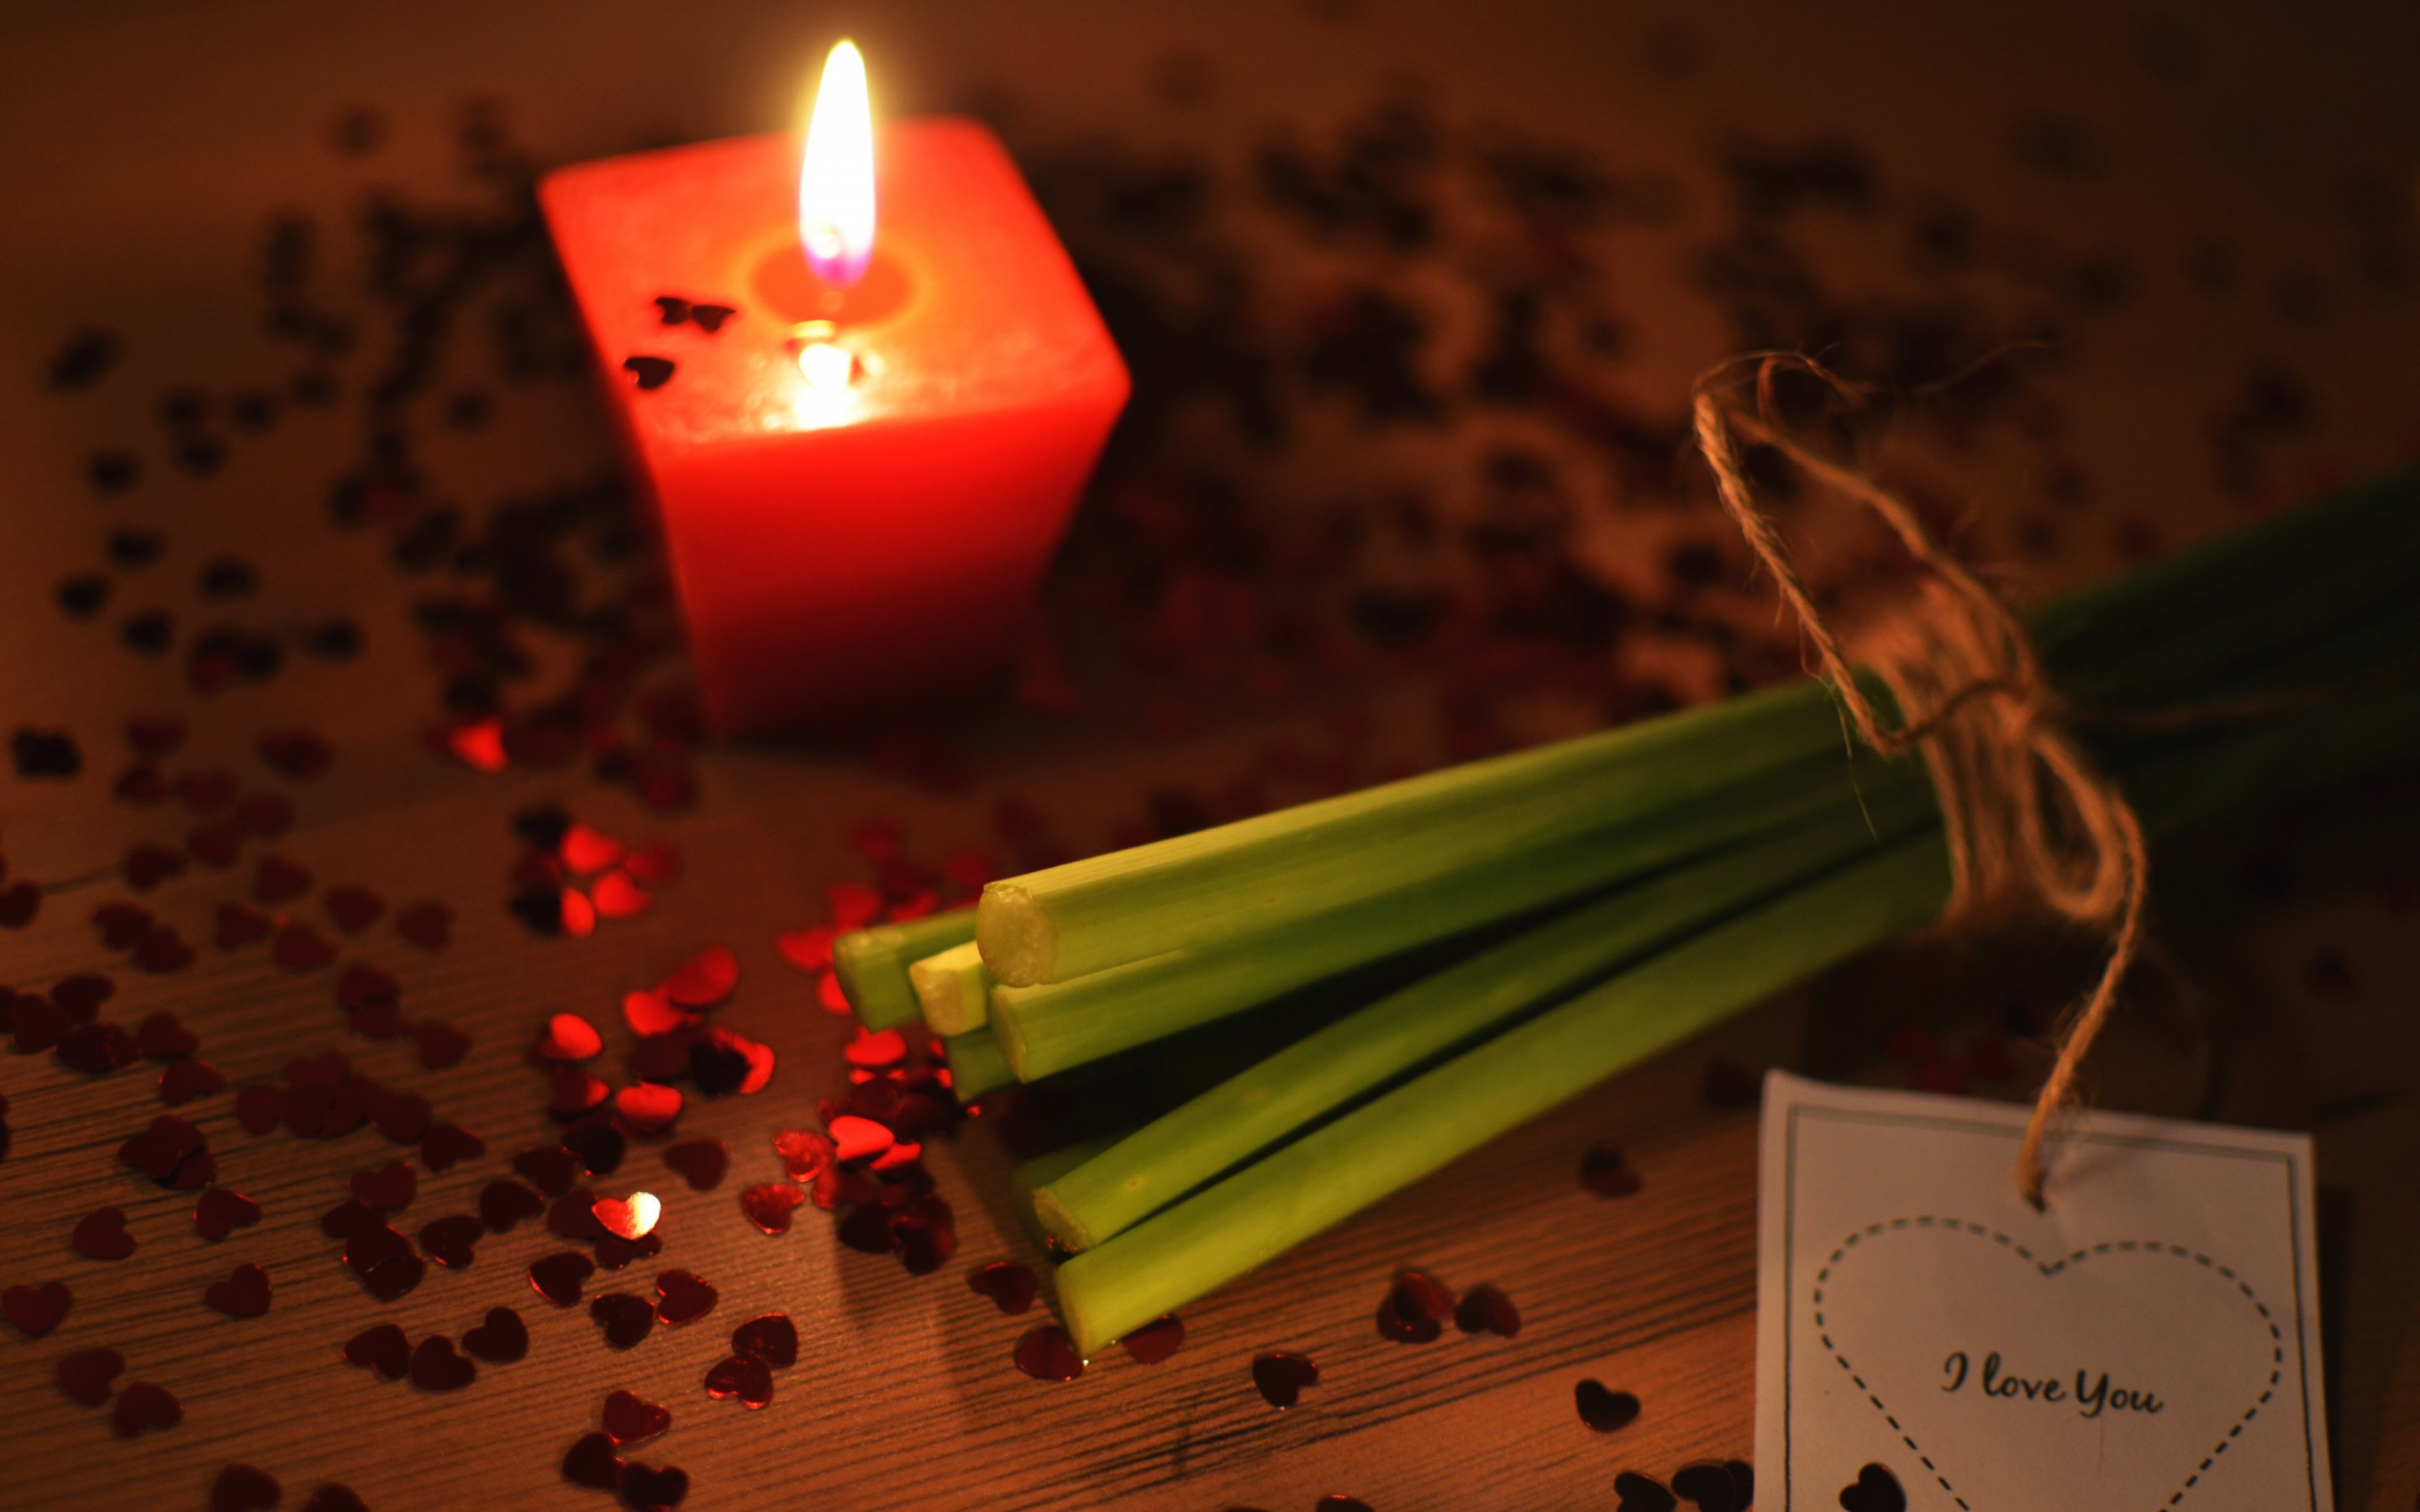 I love you, candlelight, romantic wallpaper 2880x1800